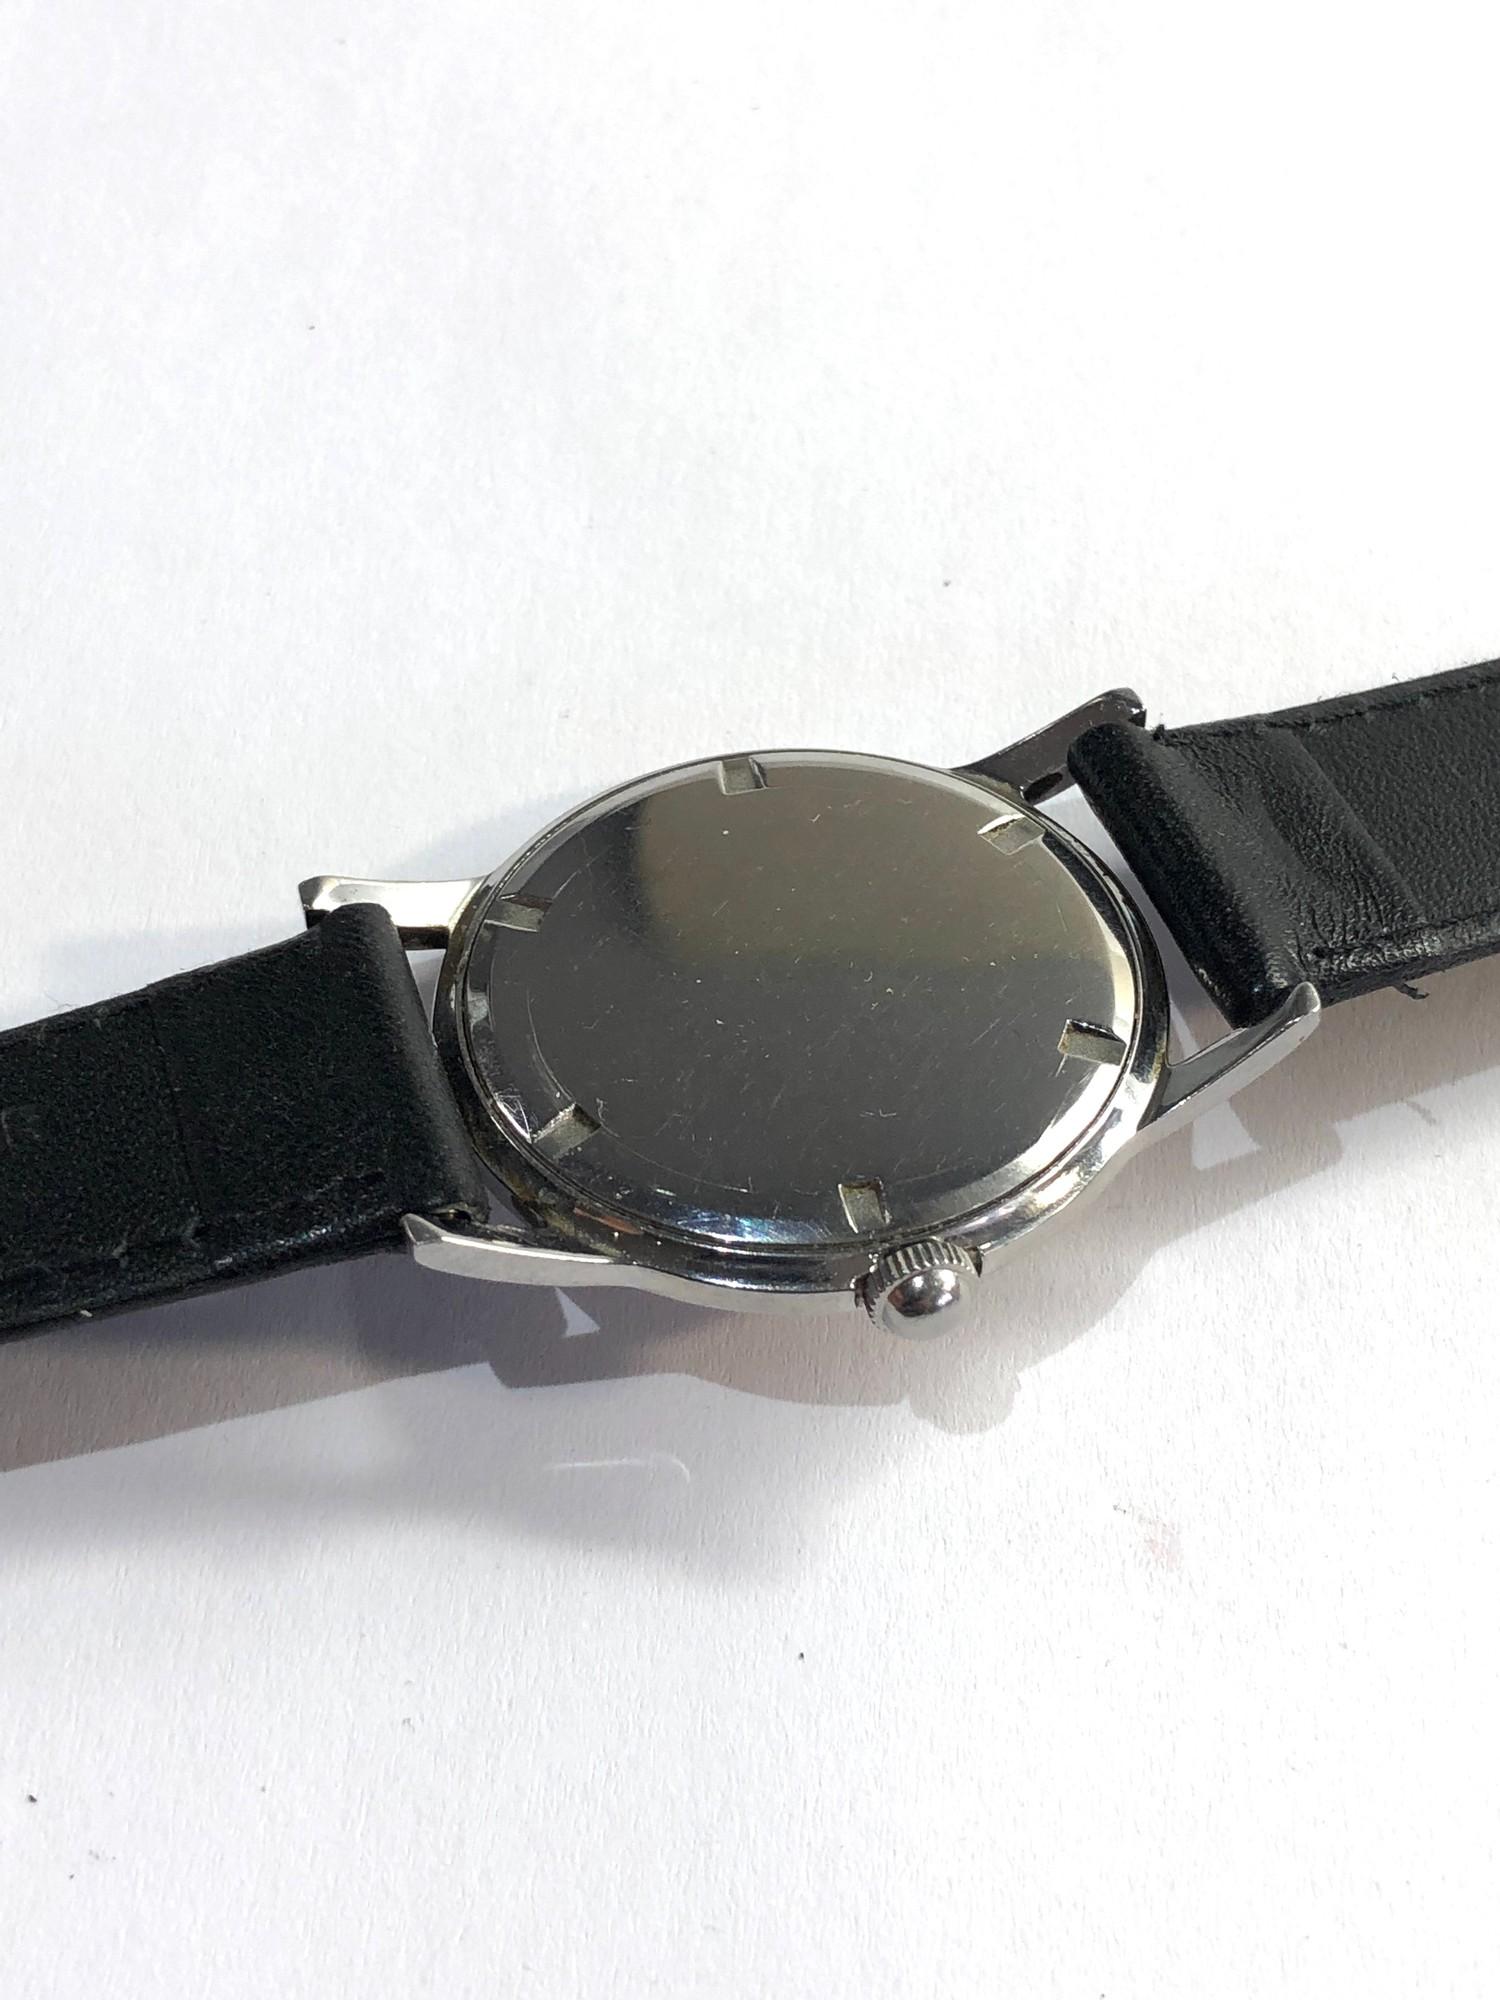 Vintage Leuba louis Geneve gents wristwatch watchwill wind and tick but no warranty is given - Image 3 of 4